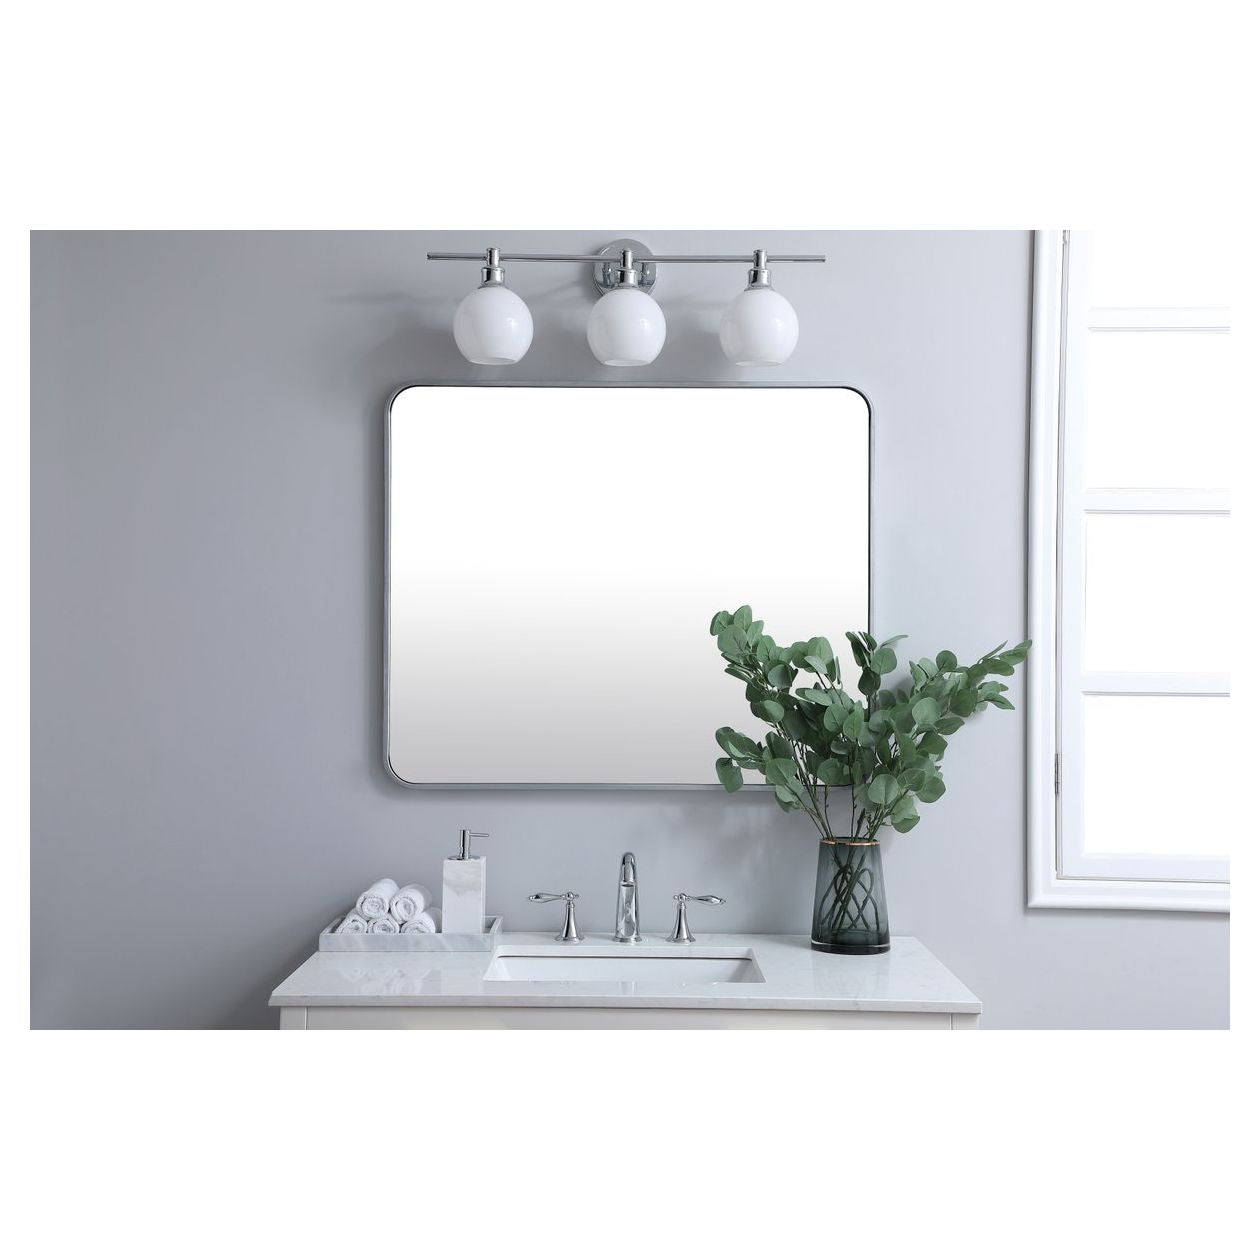 MR803036S Evermore 30" x 36" Metal Framed Rectangular Mirror in Silver